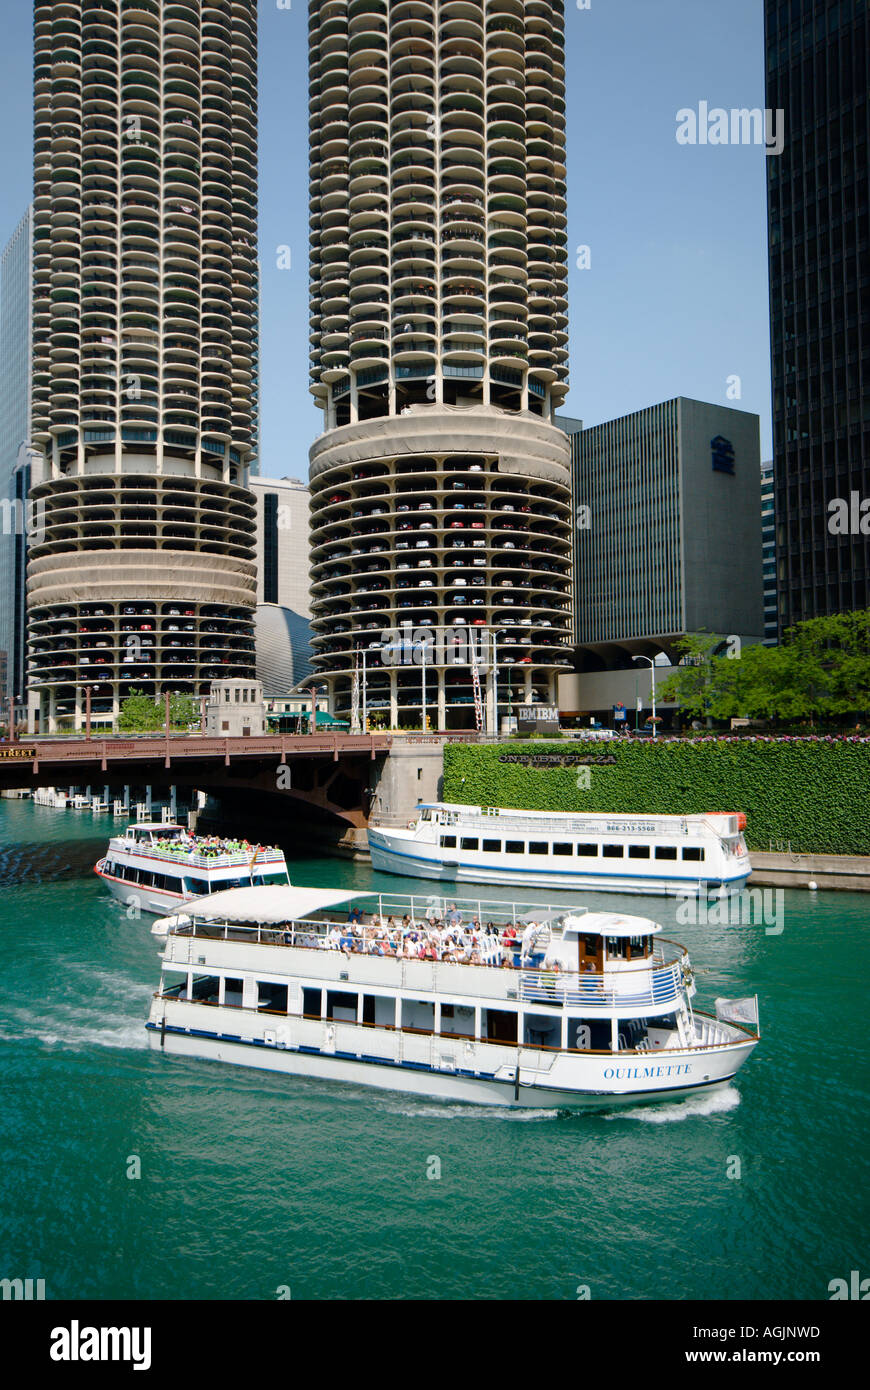 Tour boats ply the waters of the Chicago River under the twin round towers of Marina City in Chicago Illinois Stock Photo